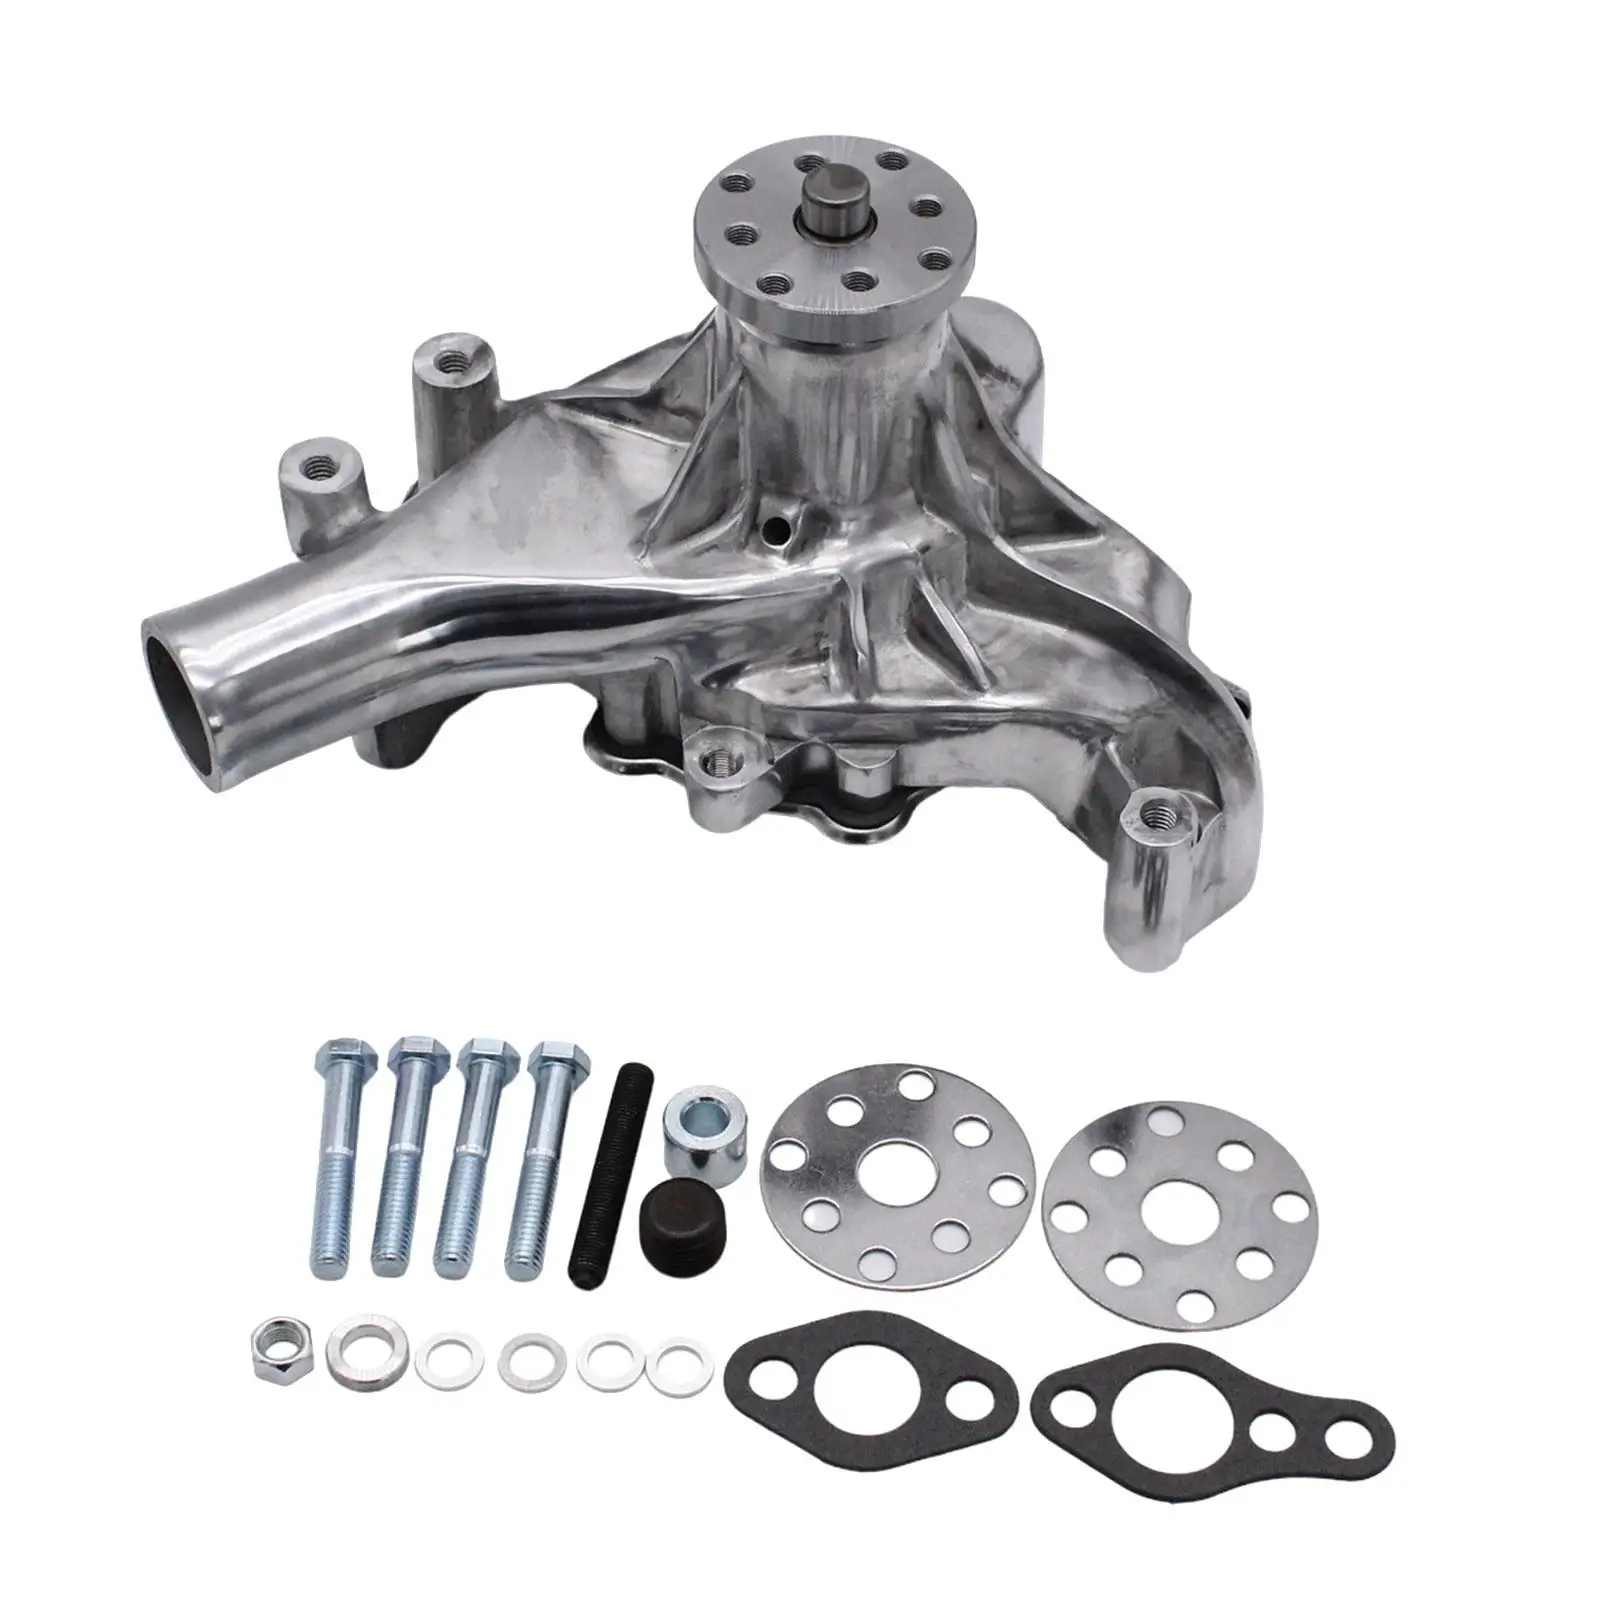 Water Pump Long Easy to Install Professional High Volume for Chevy Sbc